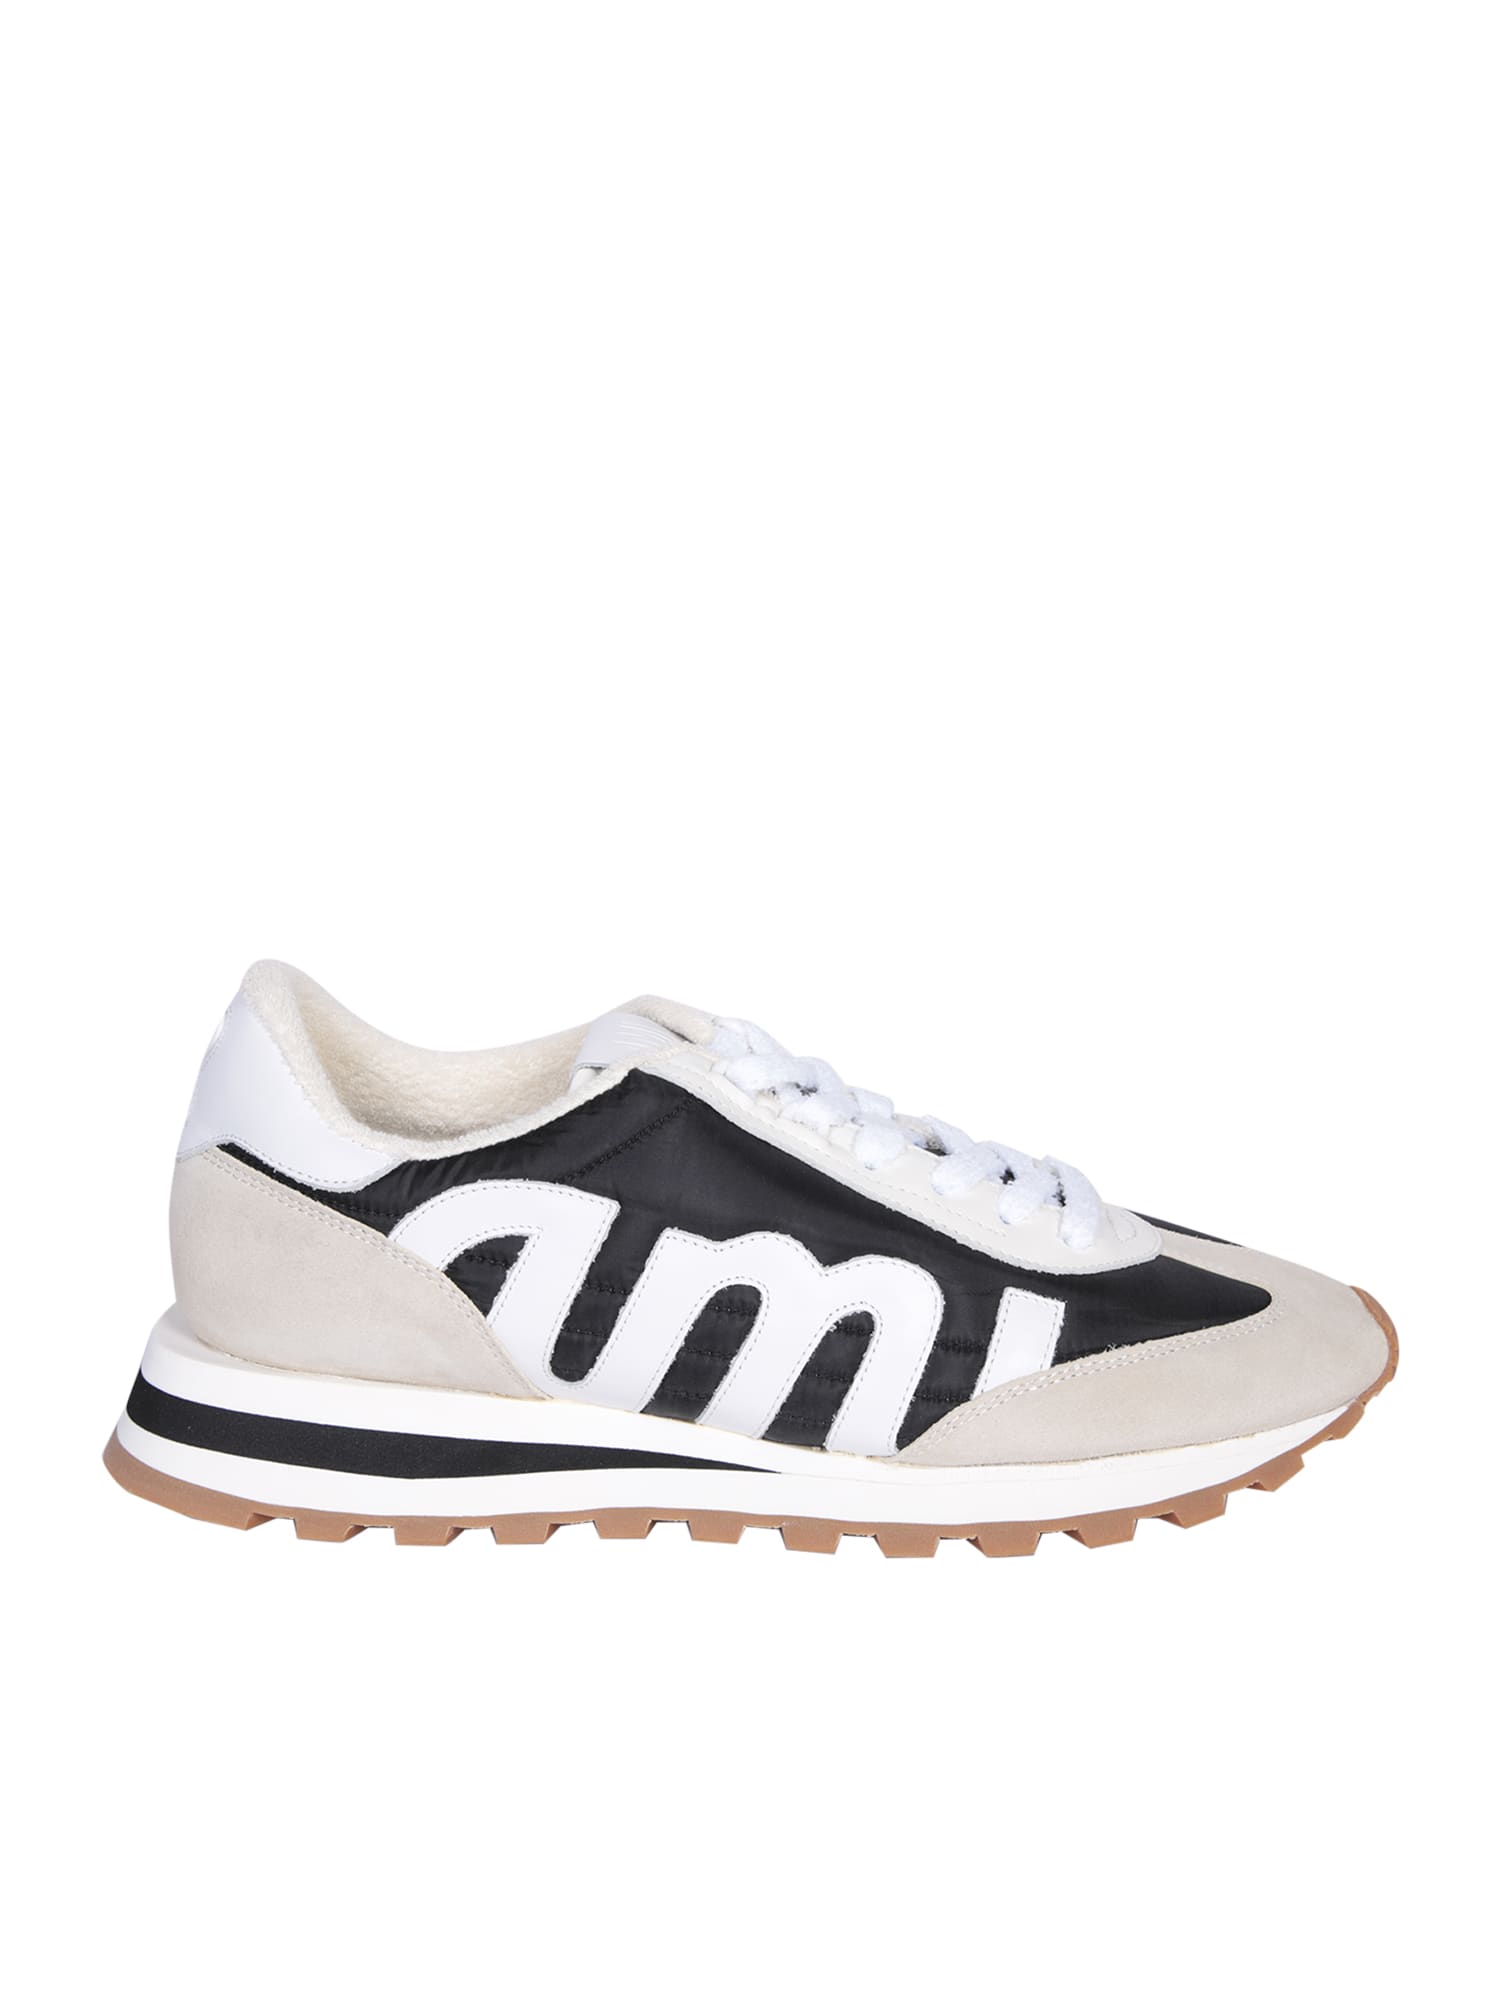 Leather And Canvas Sneakers In Black And Ivory